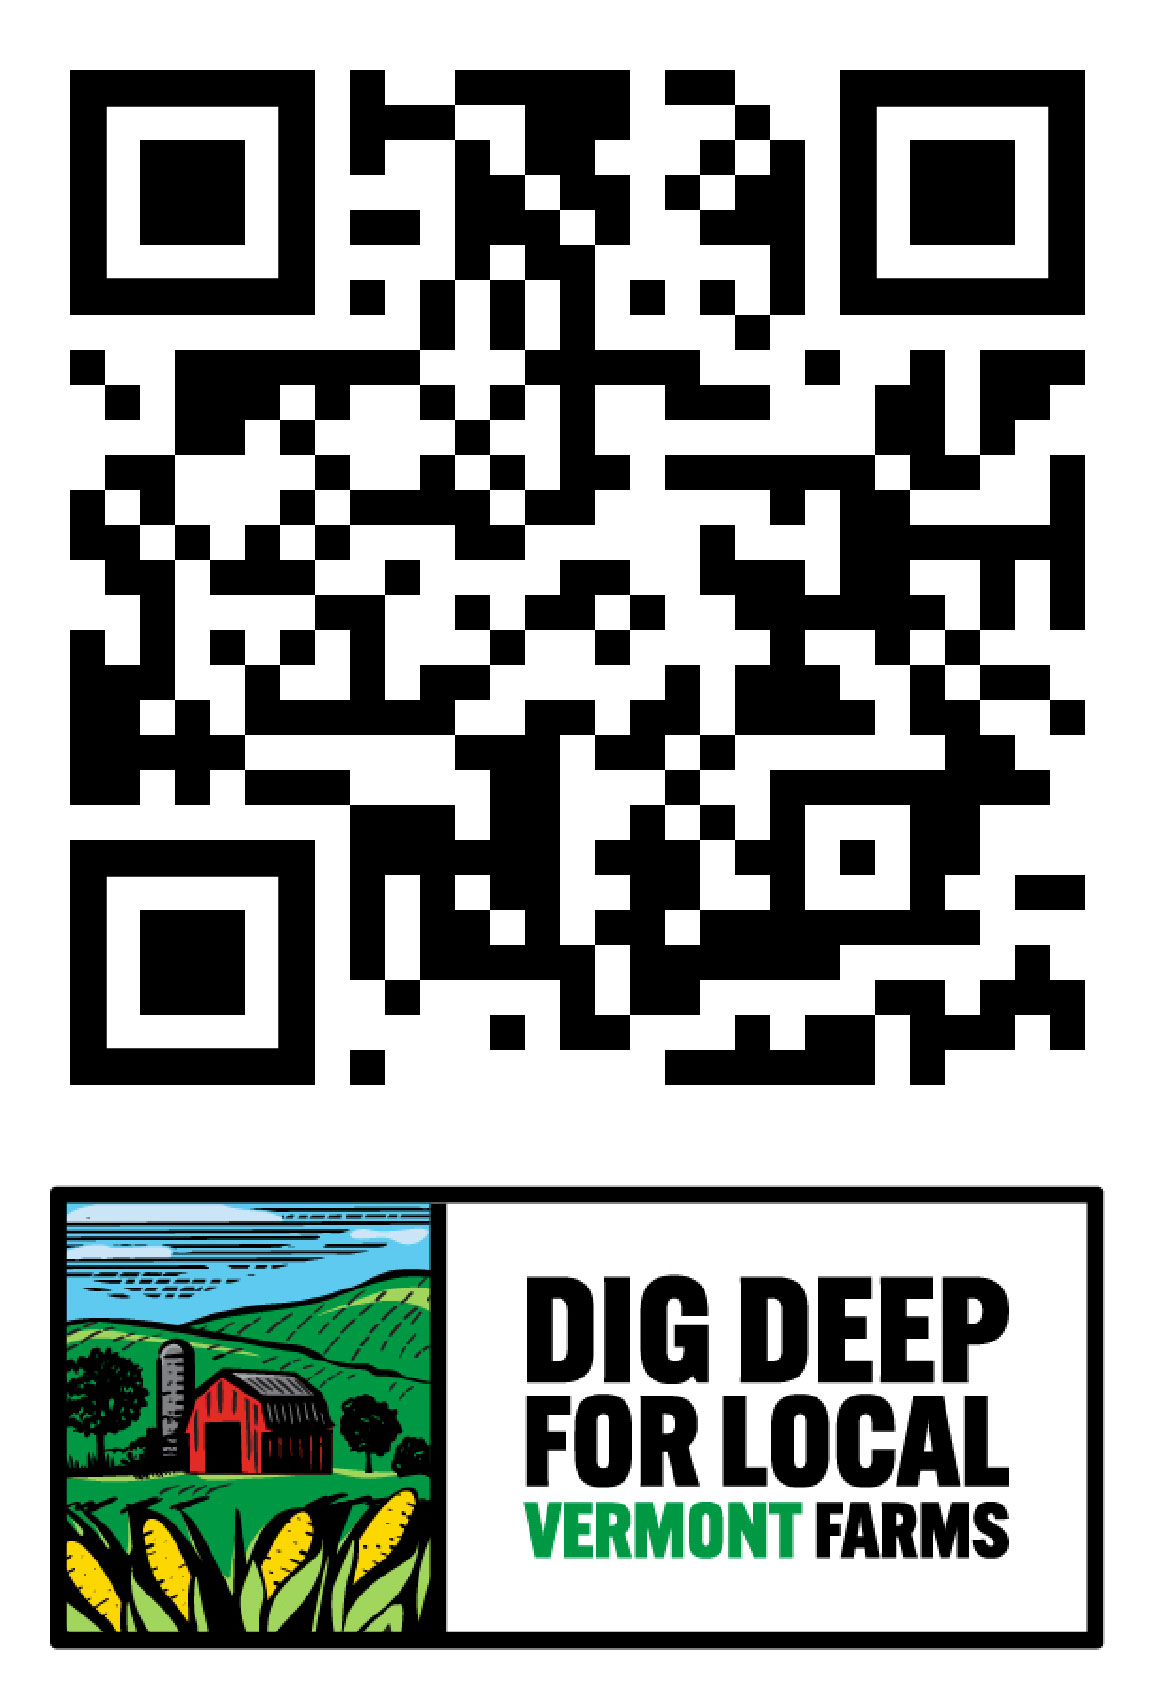 QR code and logo for Dig Deep Vermont donate page